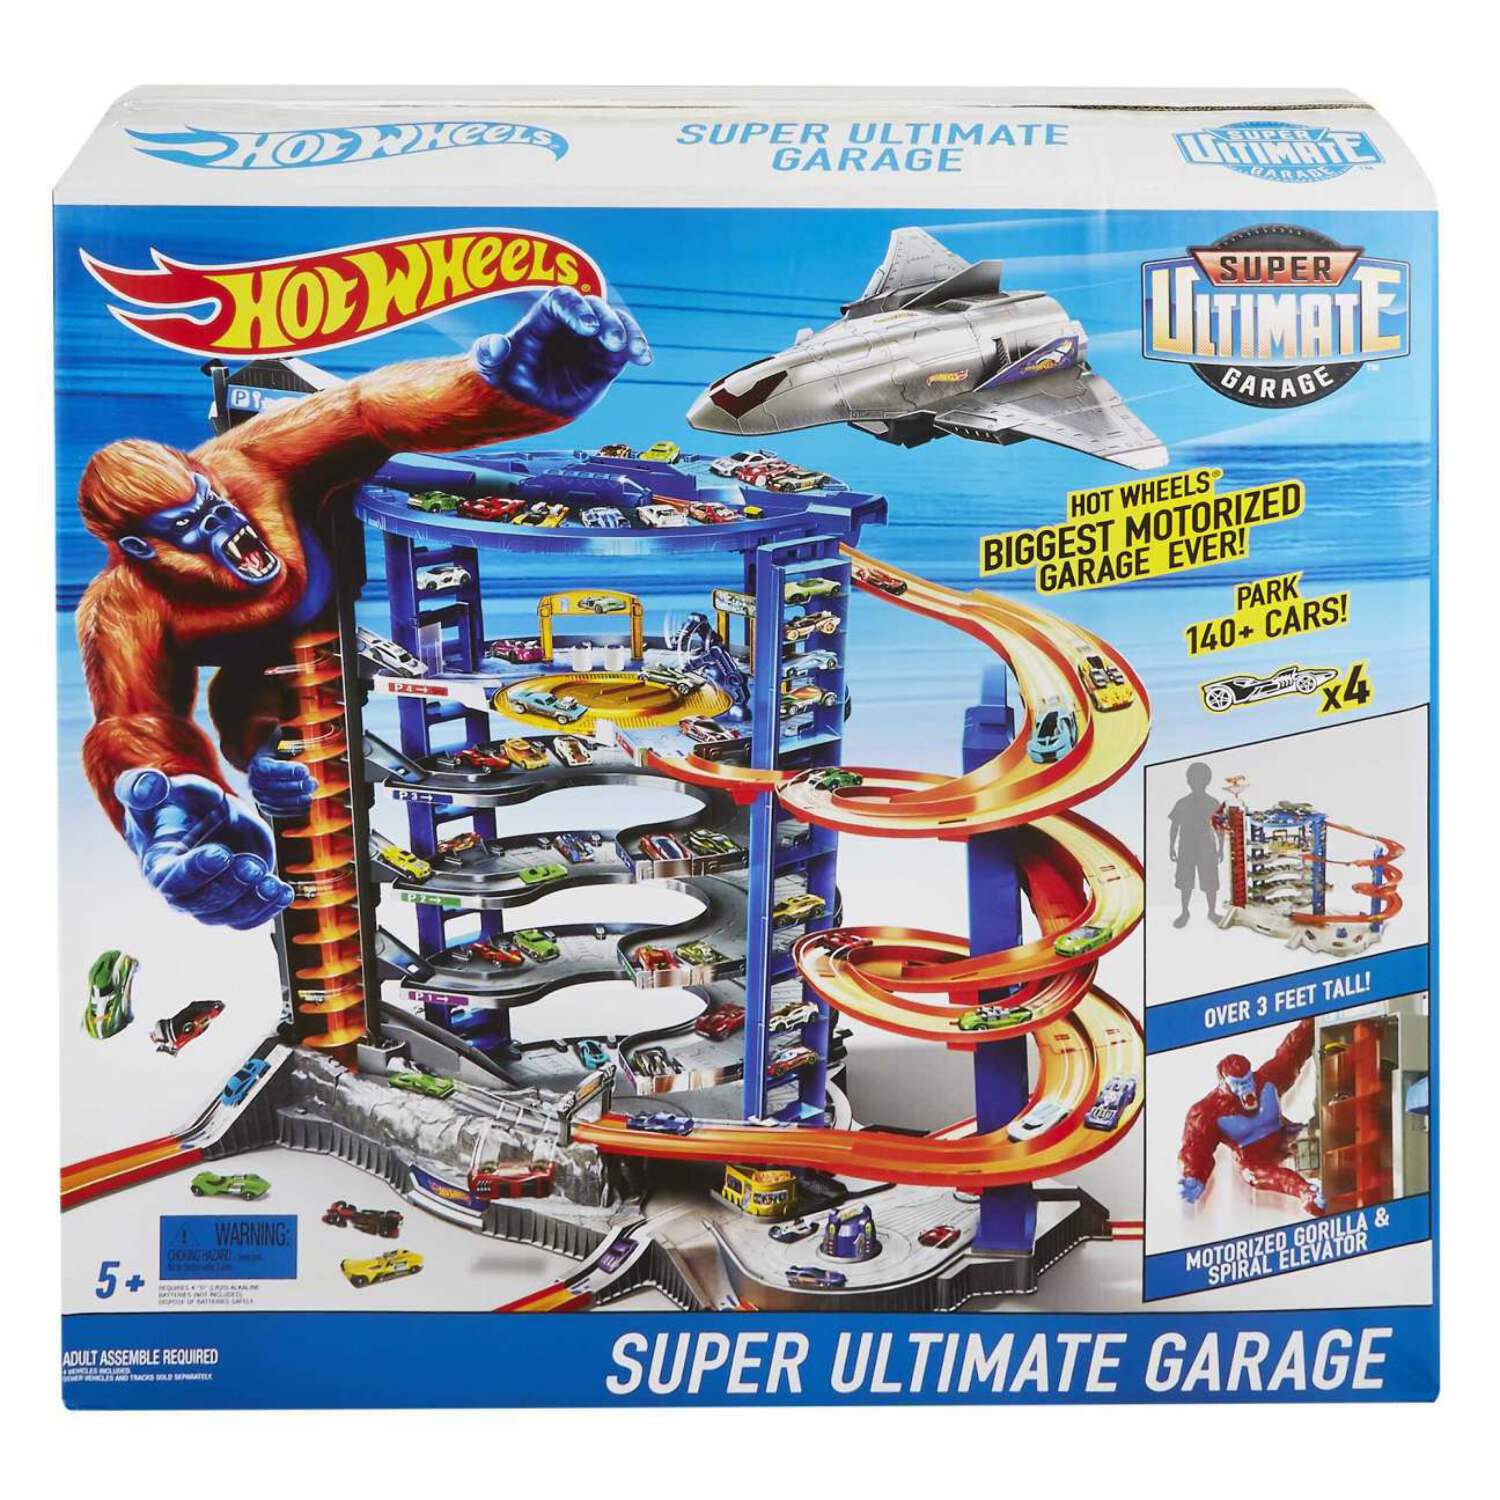 Hot Wheels Track Set with 4 1:64 Scale Toy Cars, Super Ultimate Garage, Over 3-Feet Tall - image 7 of 8